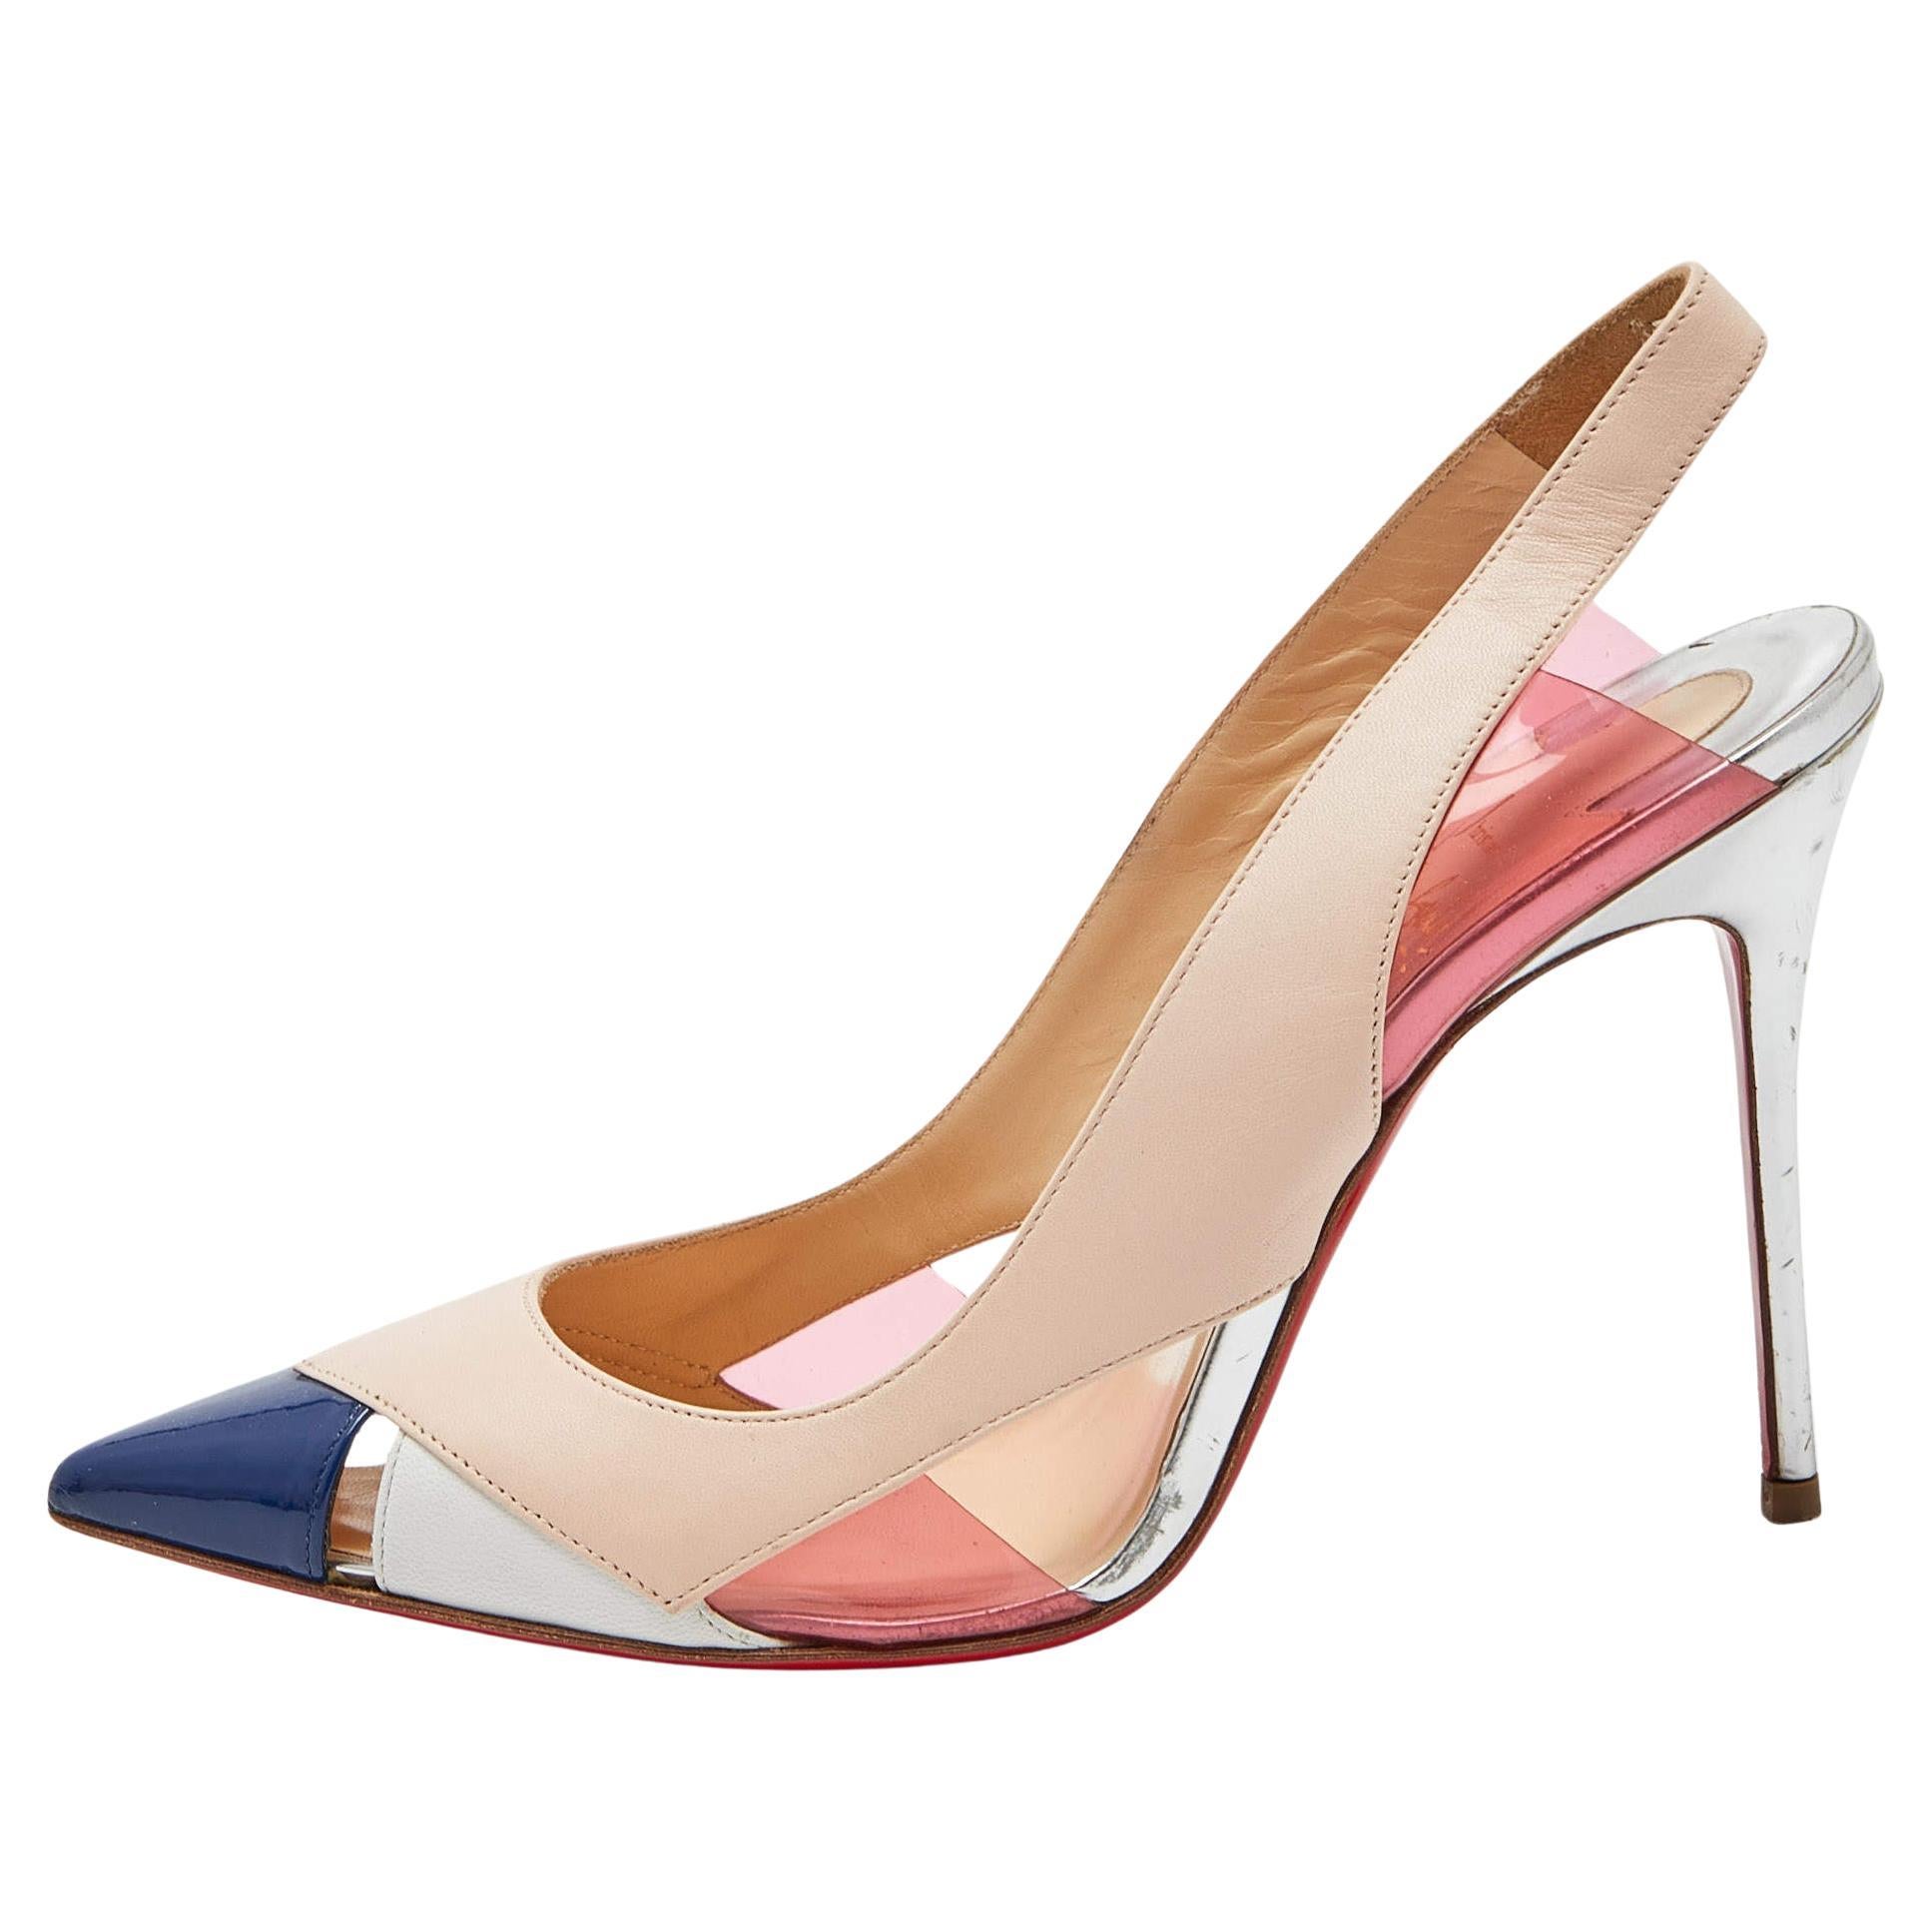 Christian Louboutin Tricolor Leather and Pvc Air Chance Slingback Sandals Size 3 For Sale